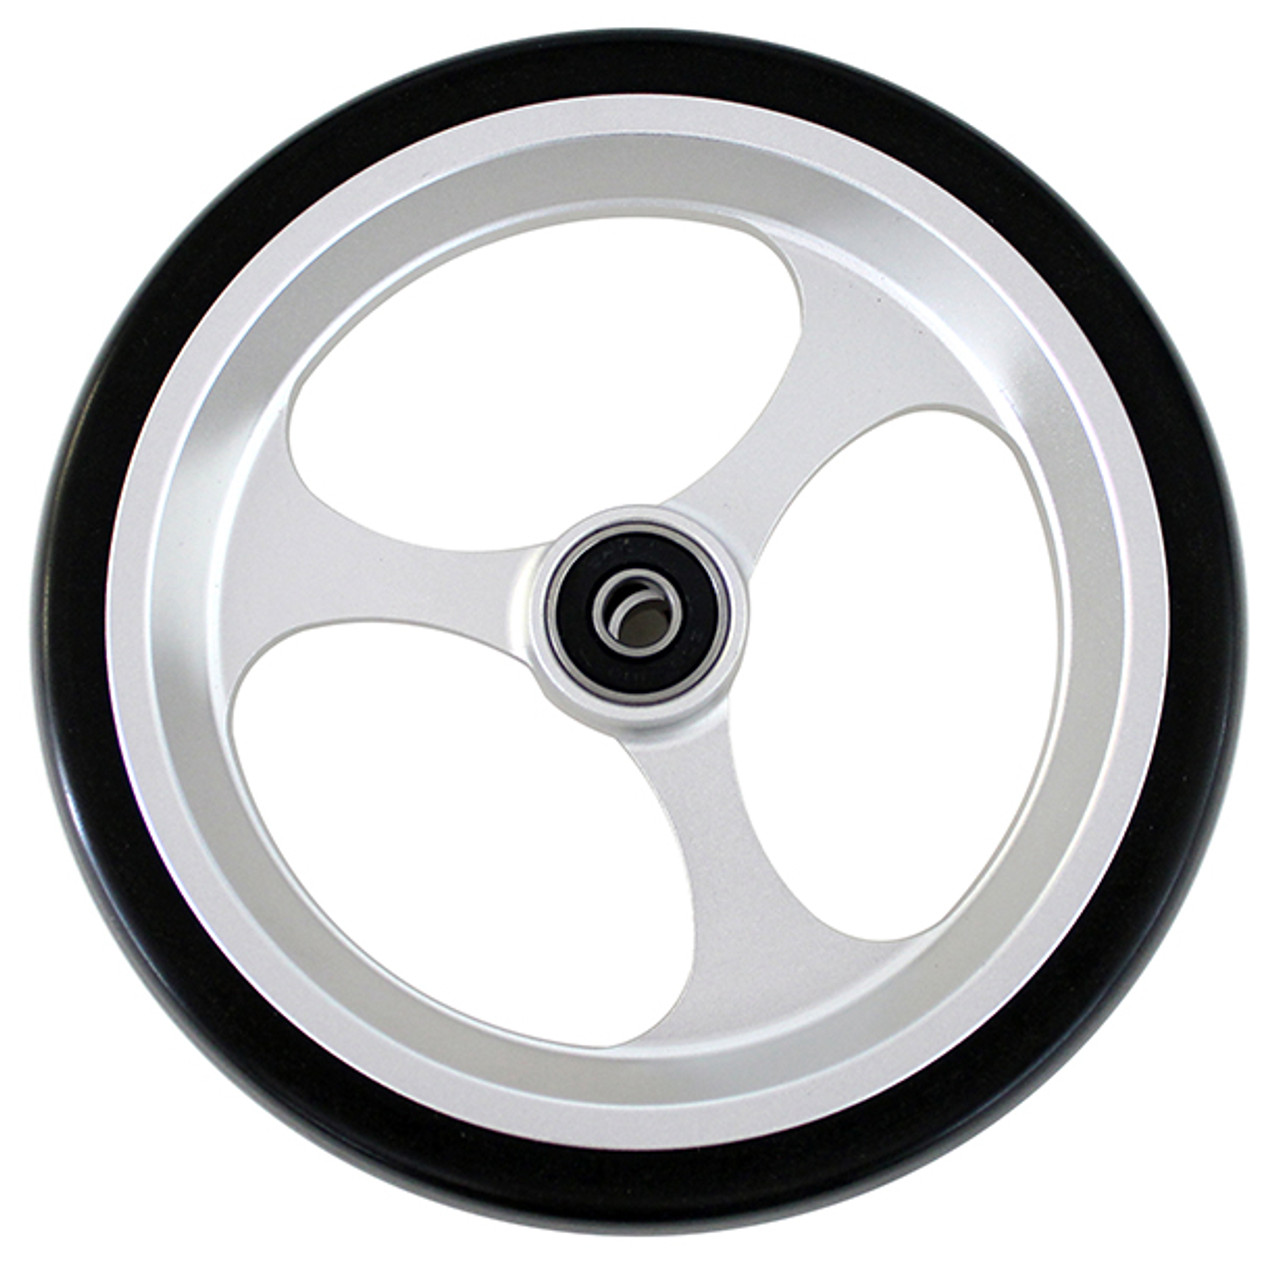 6" X 1 1/2" Aluminum 3 Spoke Wheel / Soft Urethane Tire with 5/16" bearings. Sold as Pair